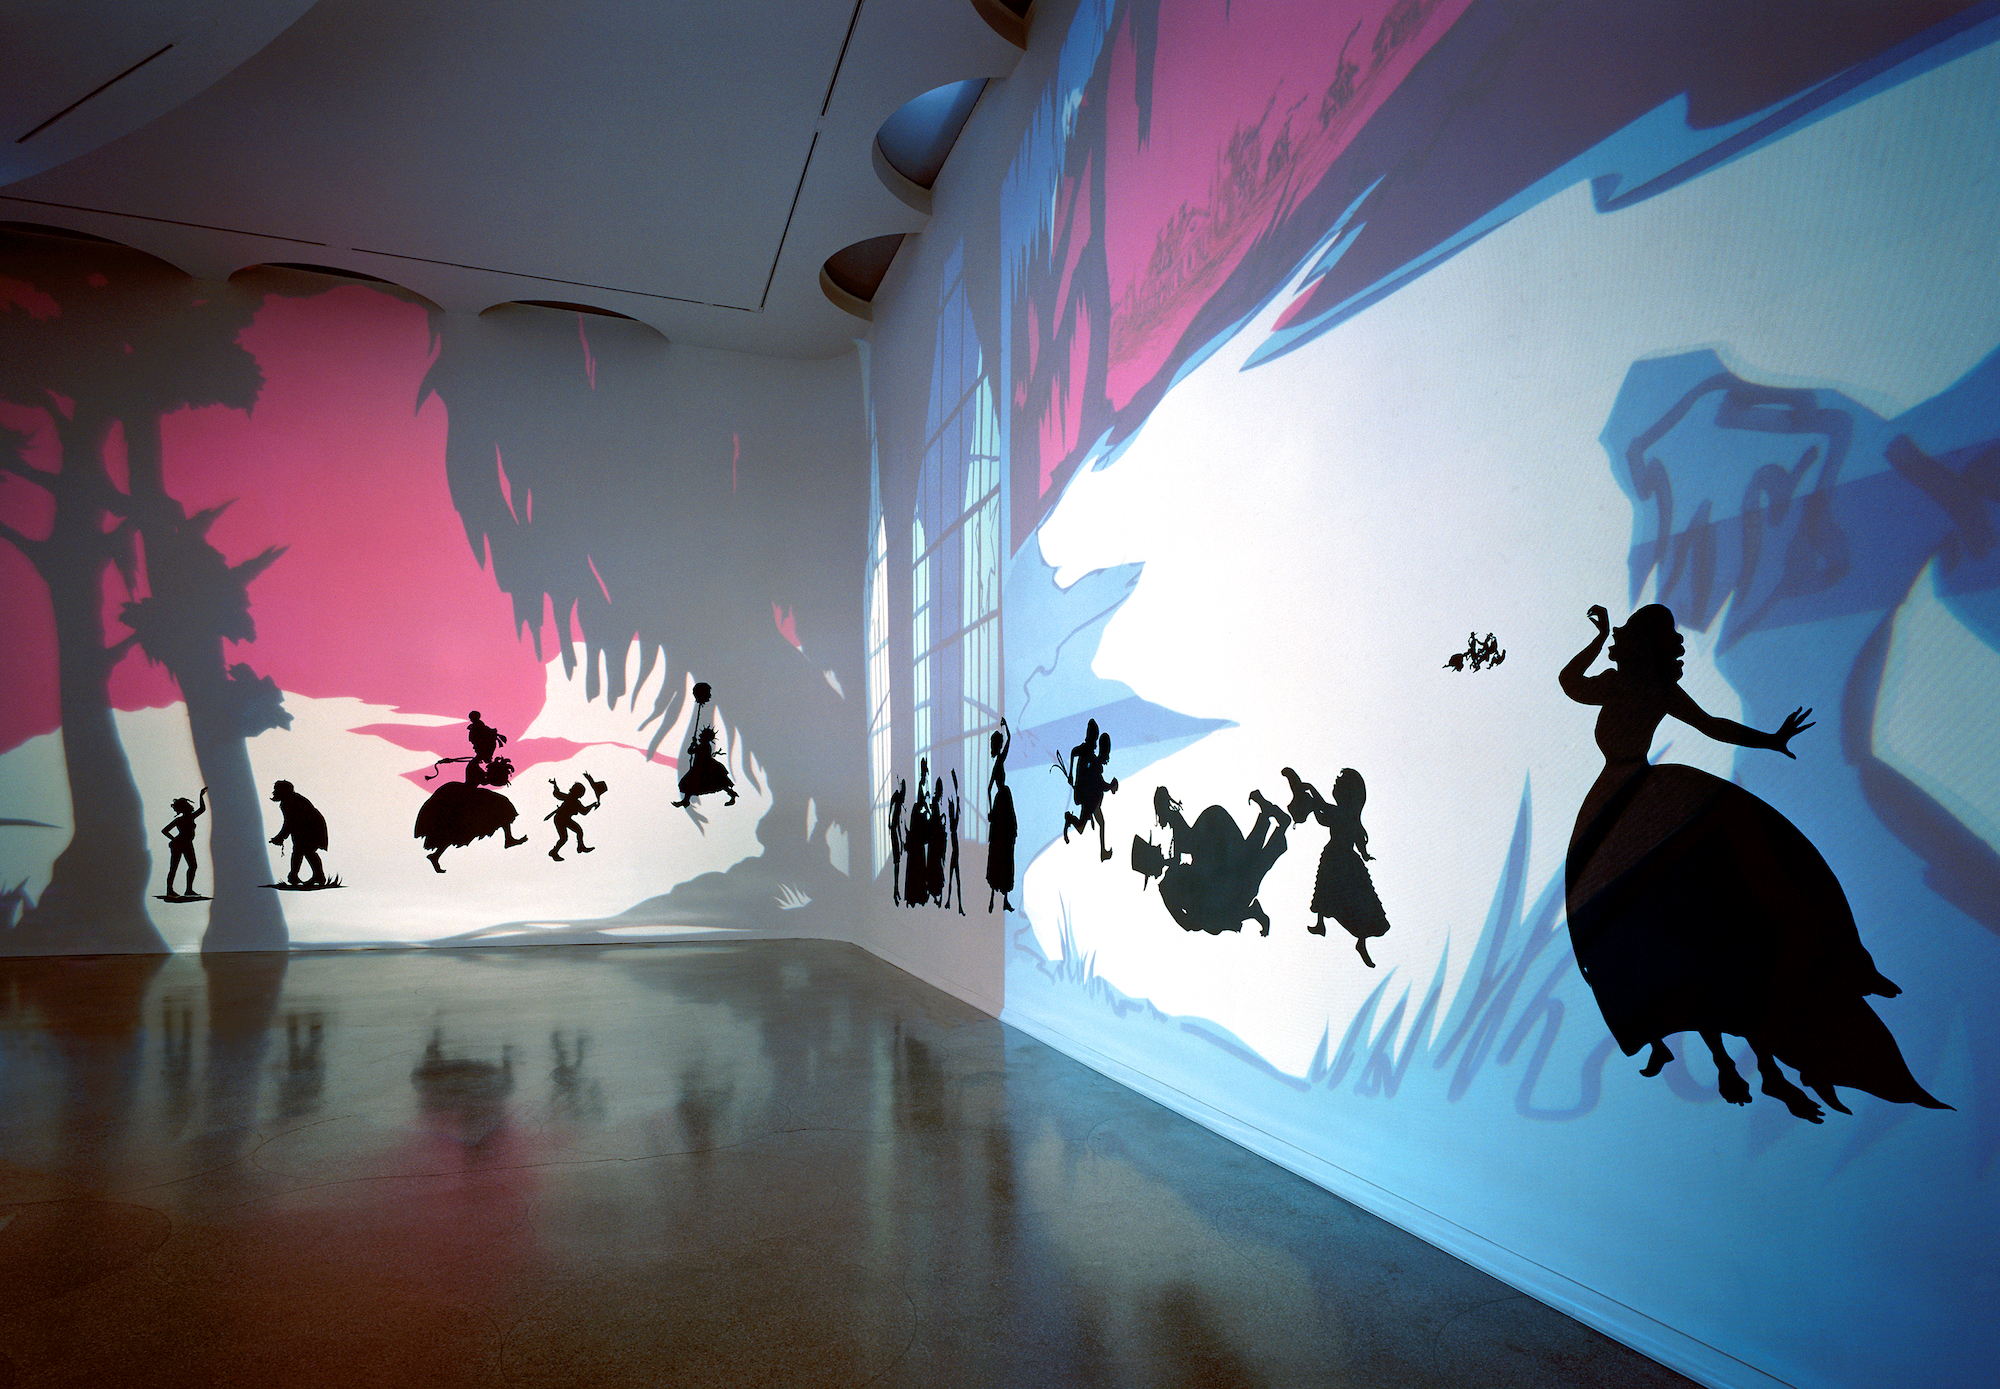  Kara Walker,&nbsp; Insurrection! (Our Tools Were Rudimentary, Yet We Pressed On) , 2000. Cut paper and projection on wall, approx. 144 x 870 inches.&nbsp;Solomon R. Guggenheim Museum, New York, 2002. Photo: Ellen Labenski 